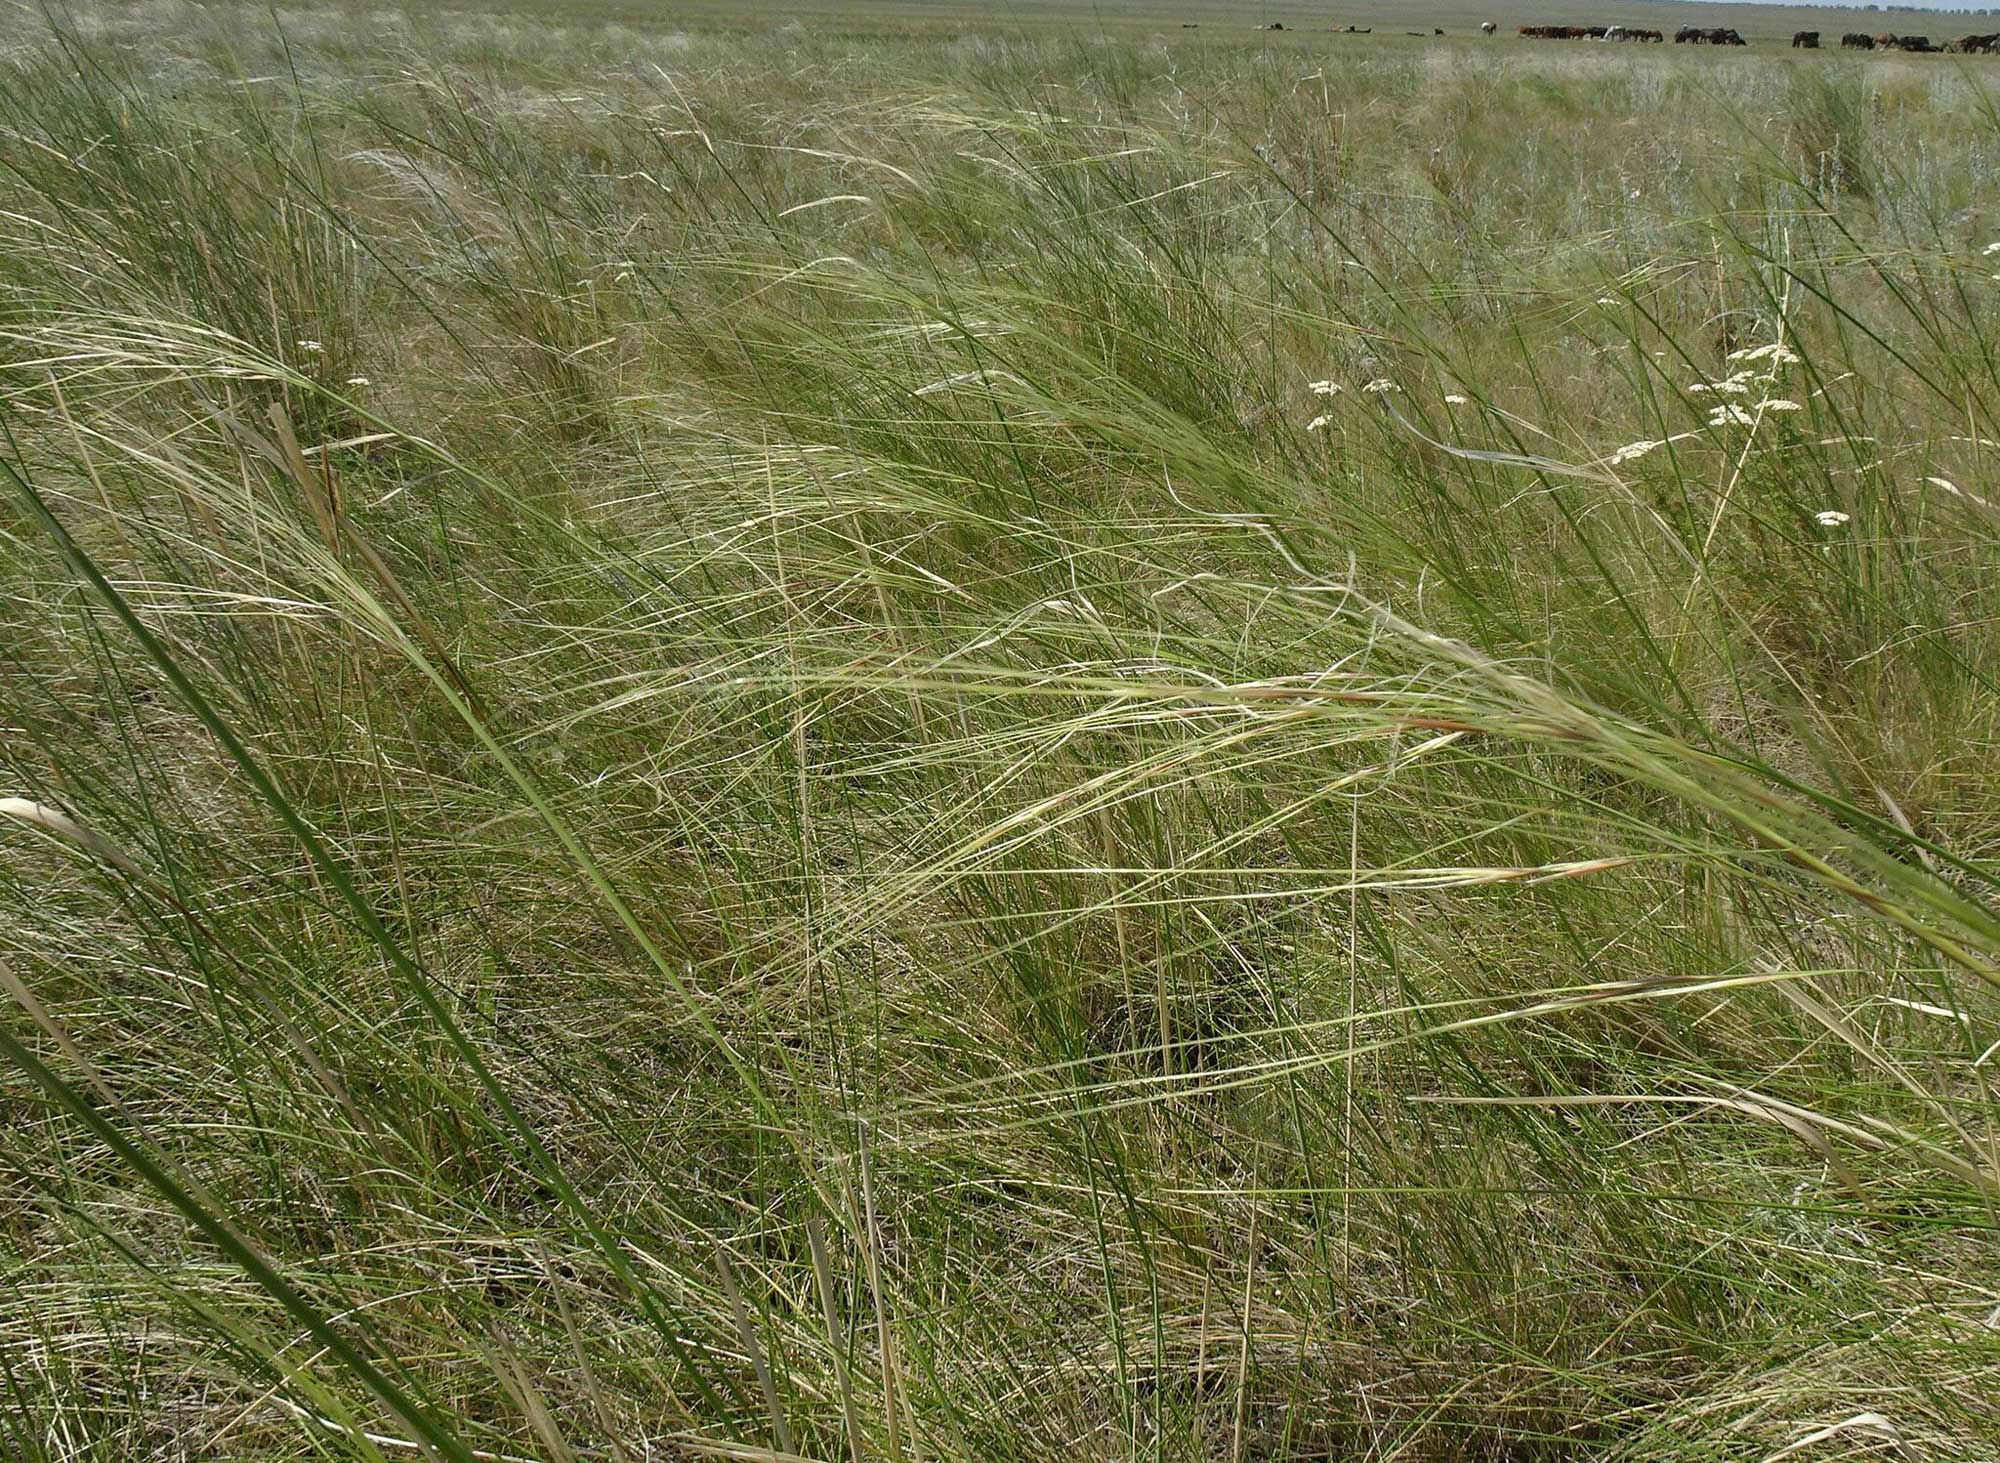 Photograph of a close-up of grasses in a field showing their feathery inflorescences.